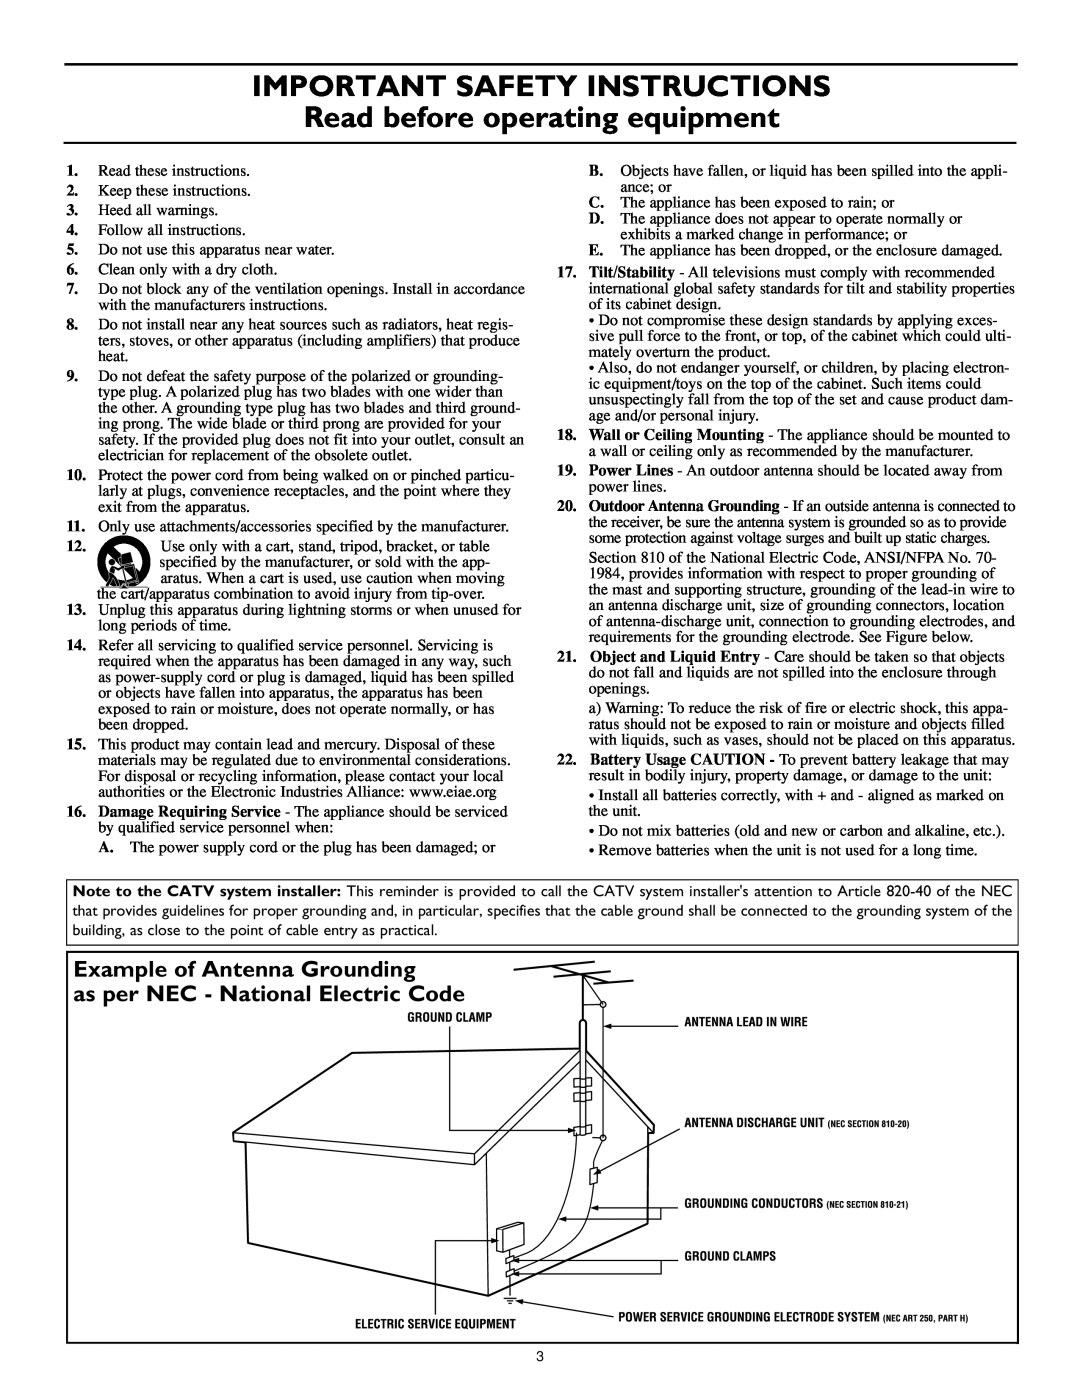 Philips 17PF9946/37 Important Safety Instructions, Read before operating equipment, Example of Antenna Grounding 